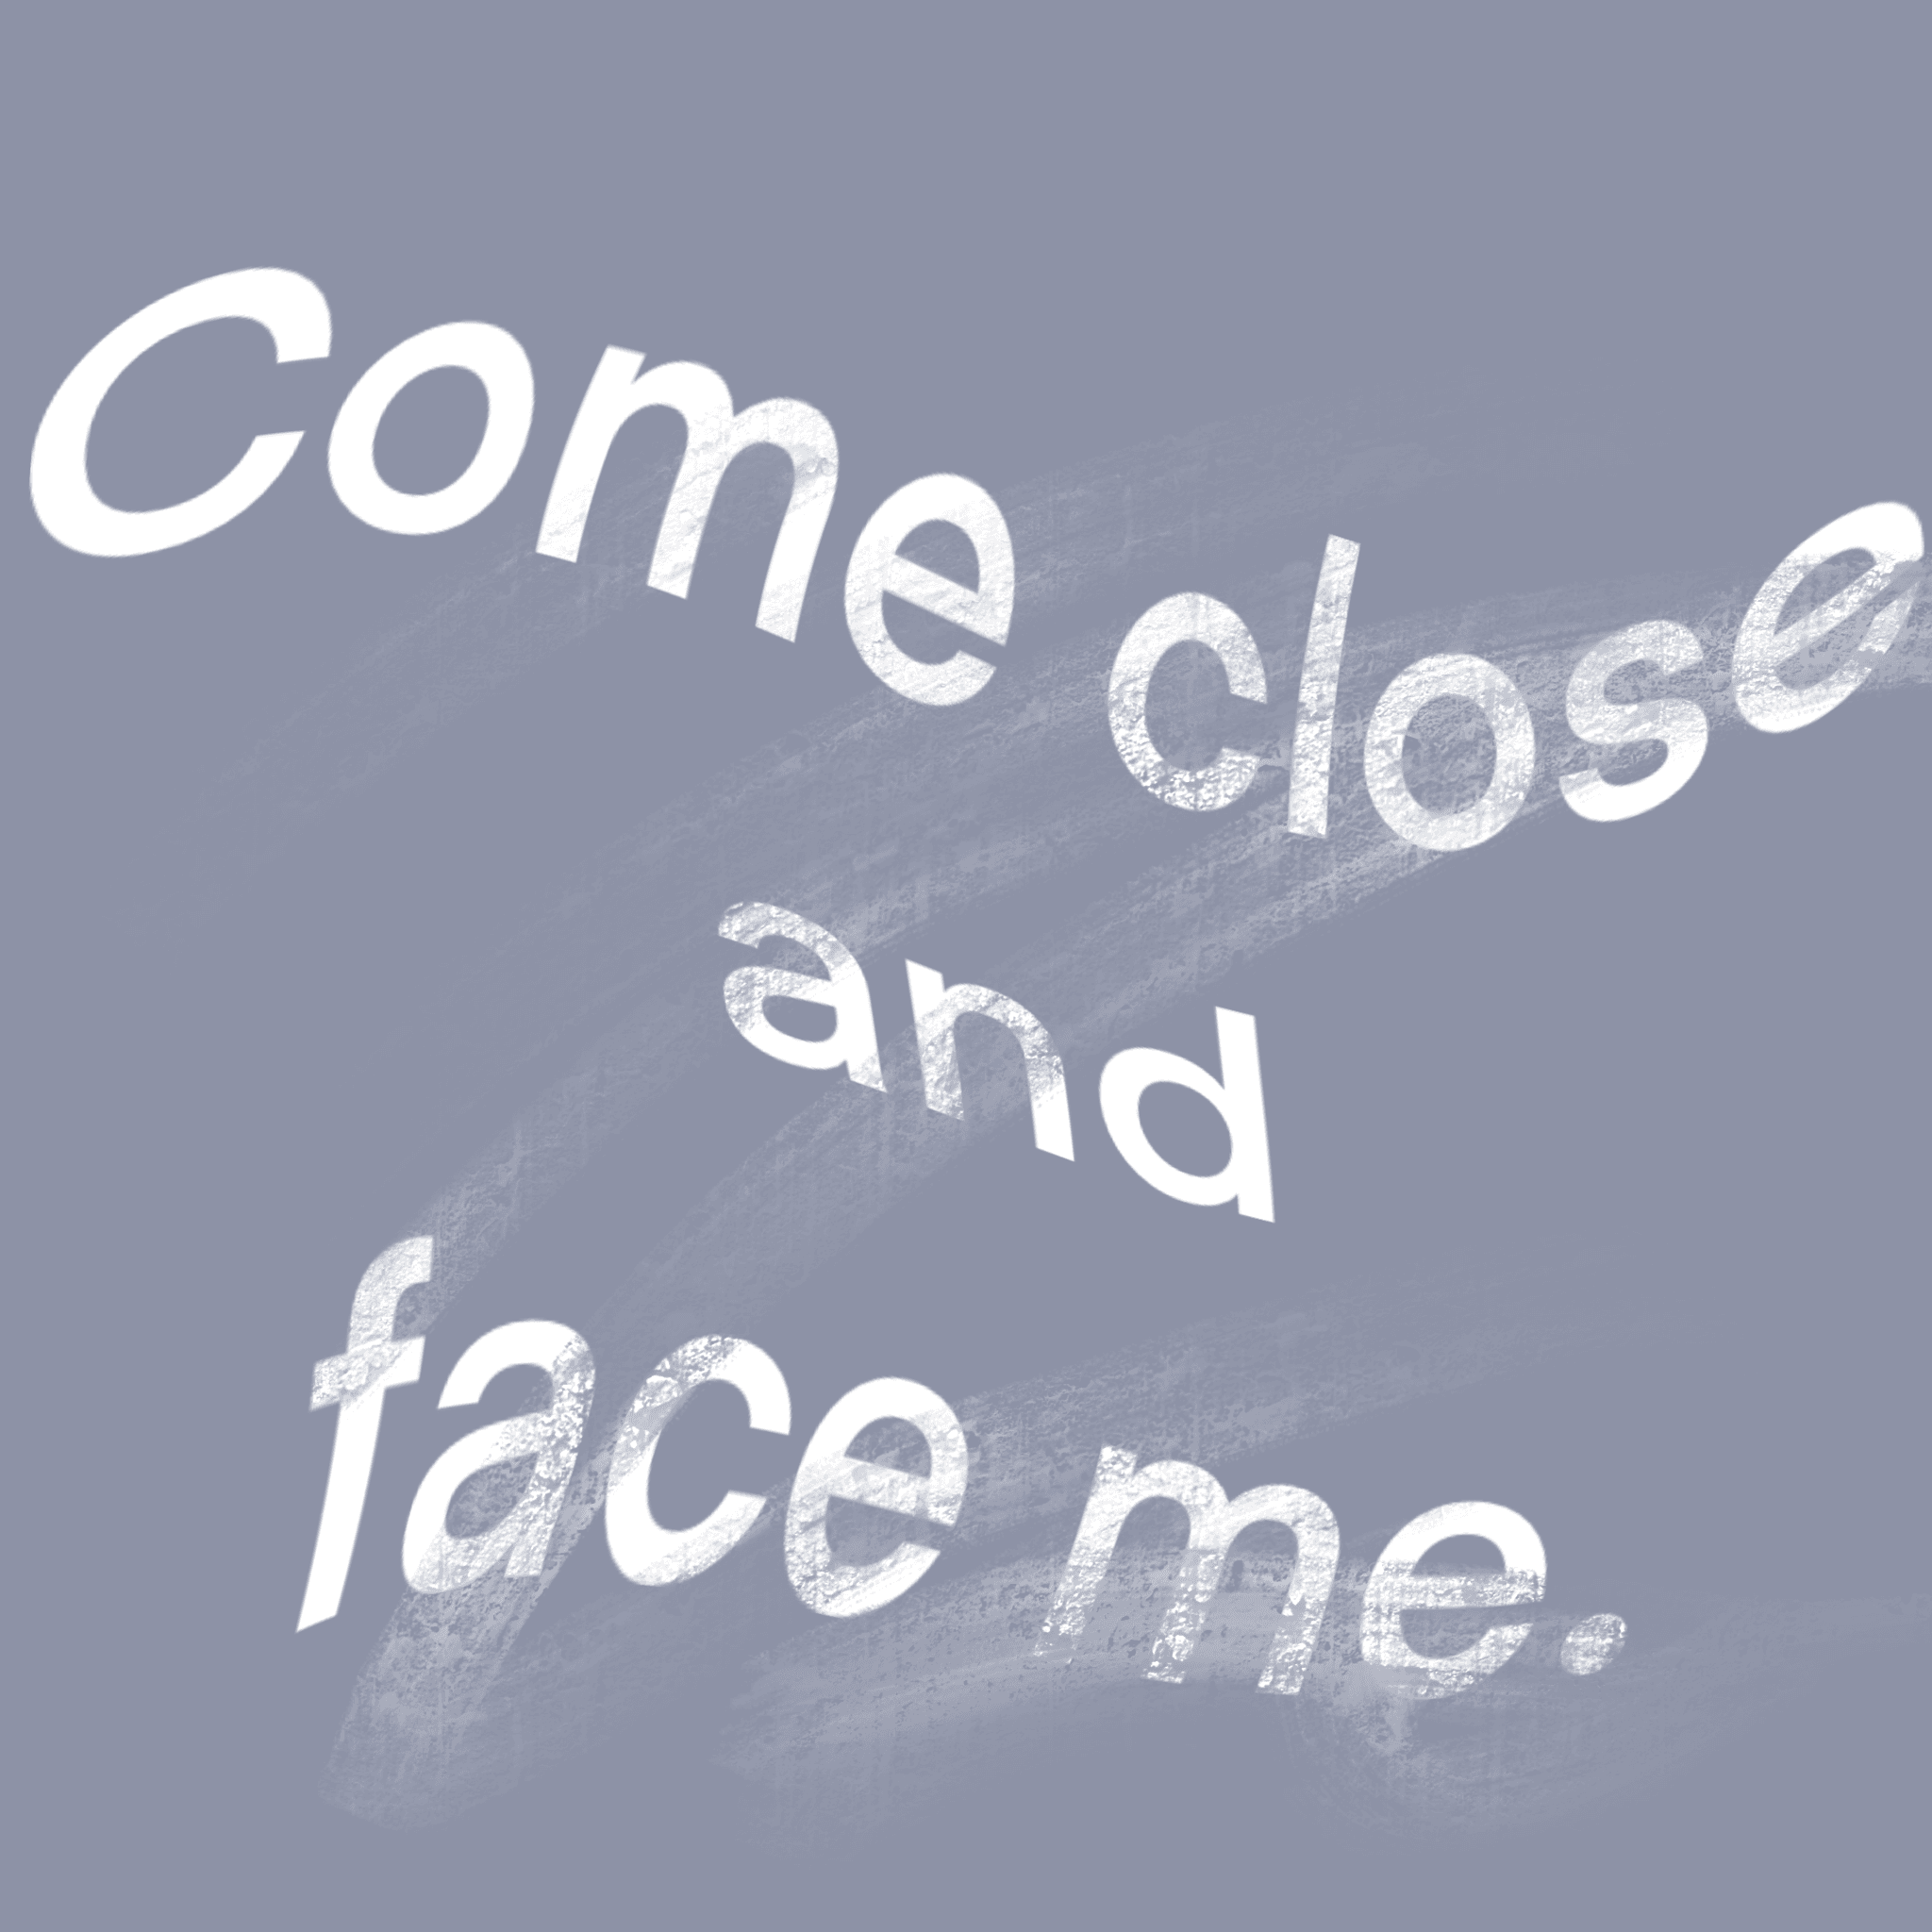 Come close and face me #3